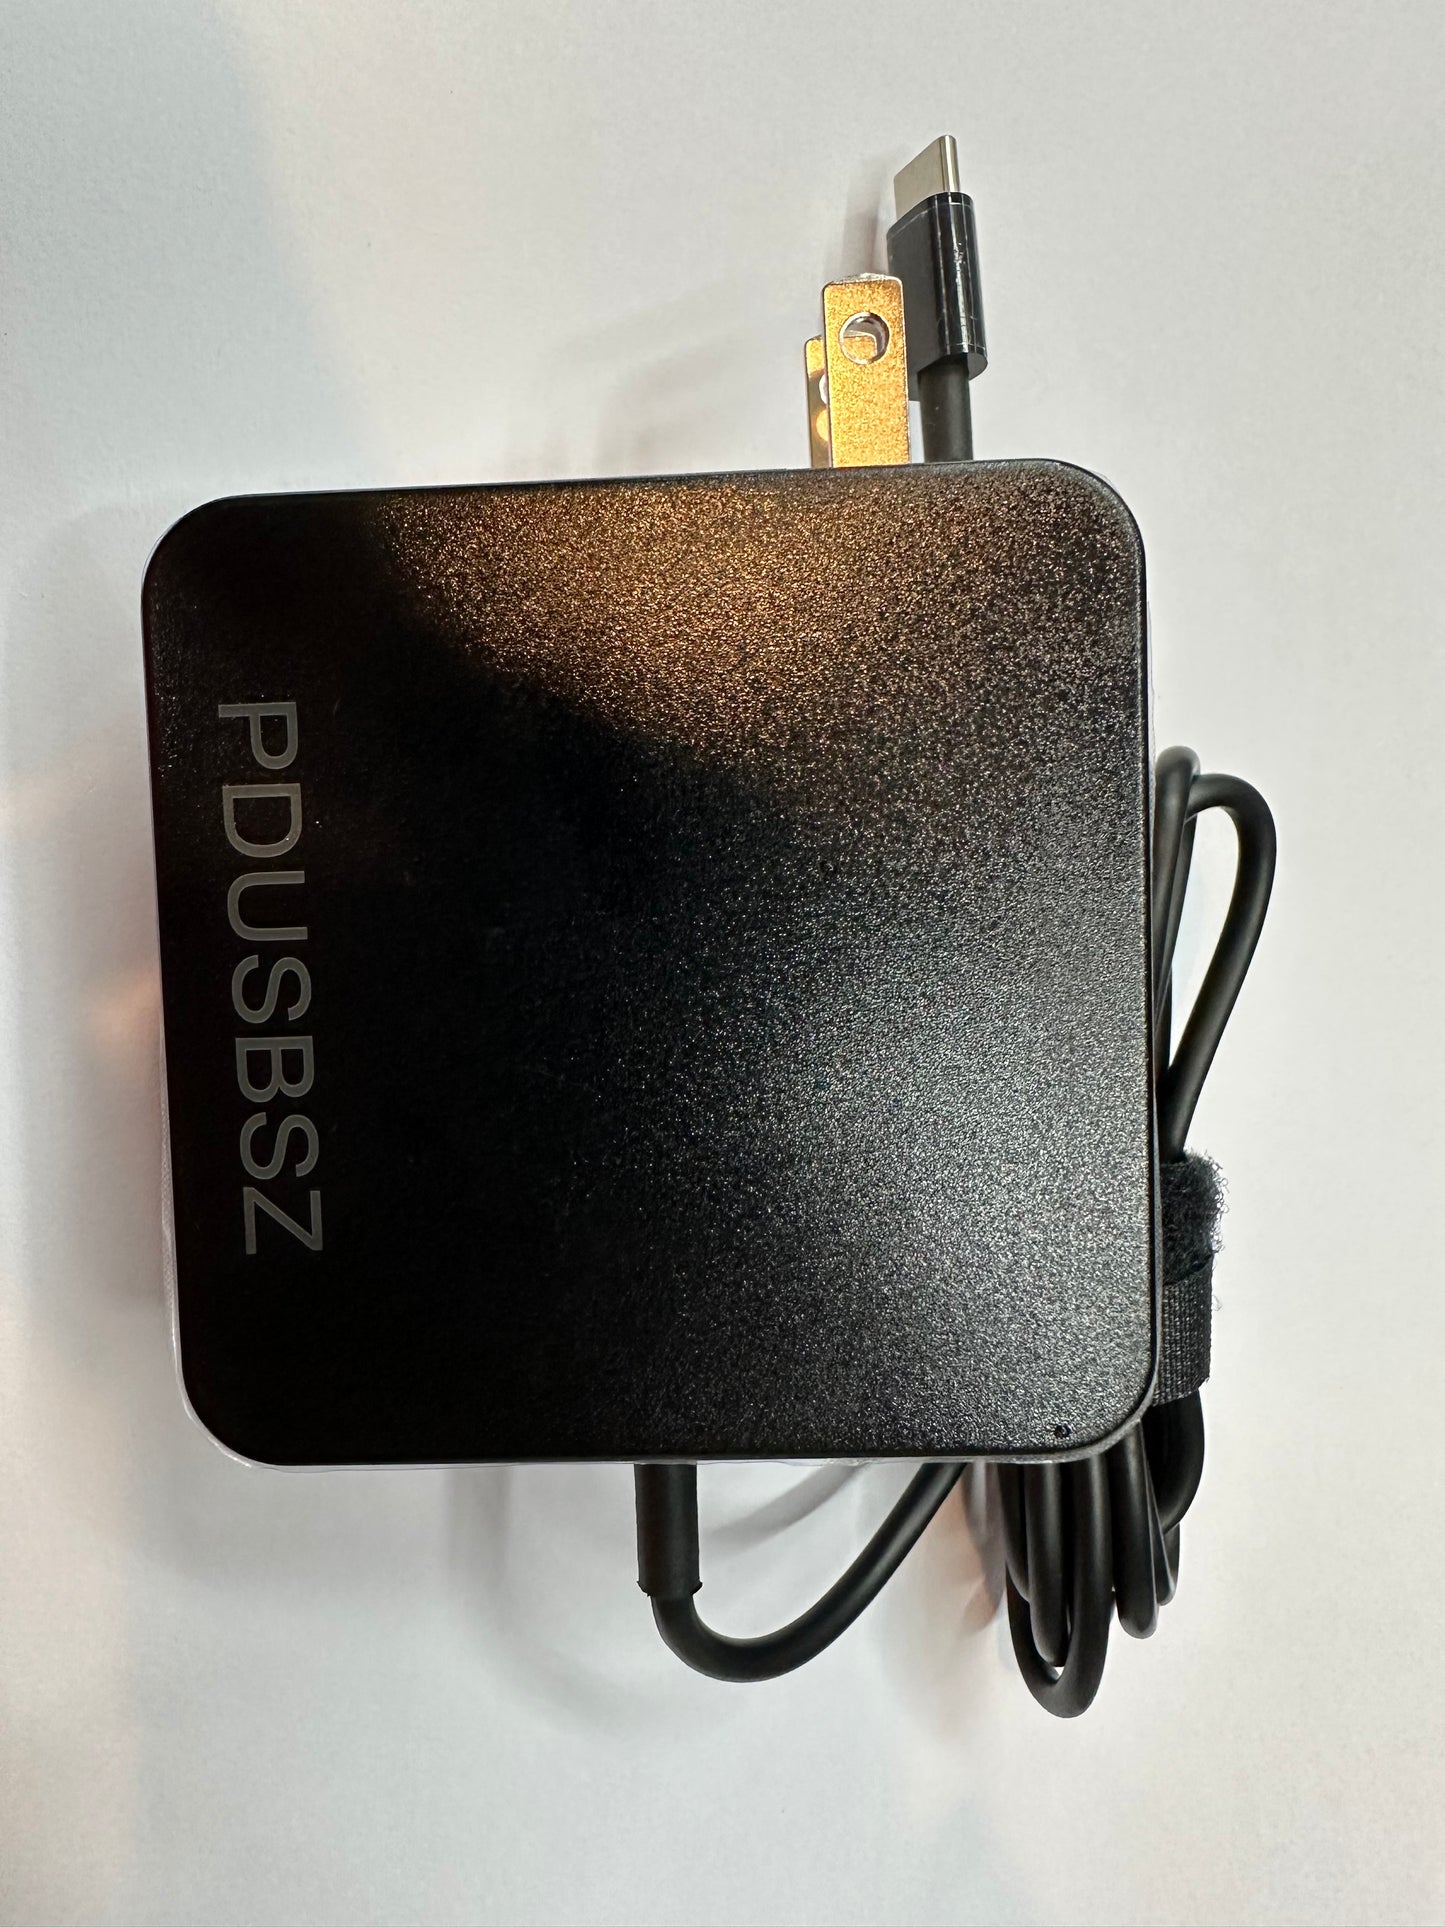 PDUSBSZ 65W Type C Power PD Wall Fast Charger Compatible with Dell Latitude, Lenovo